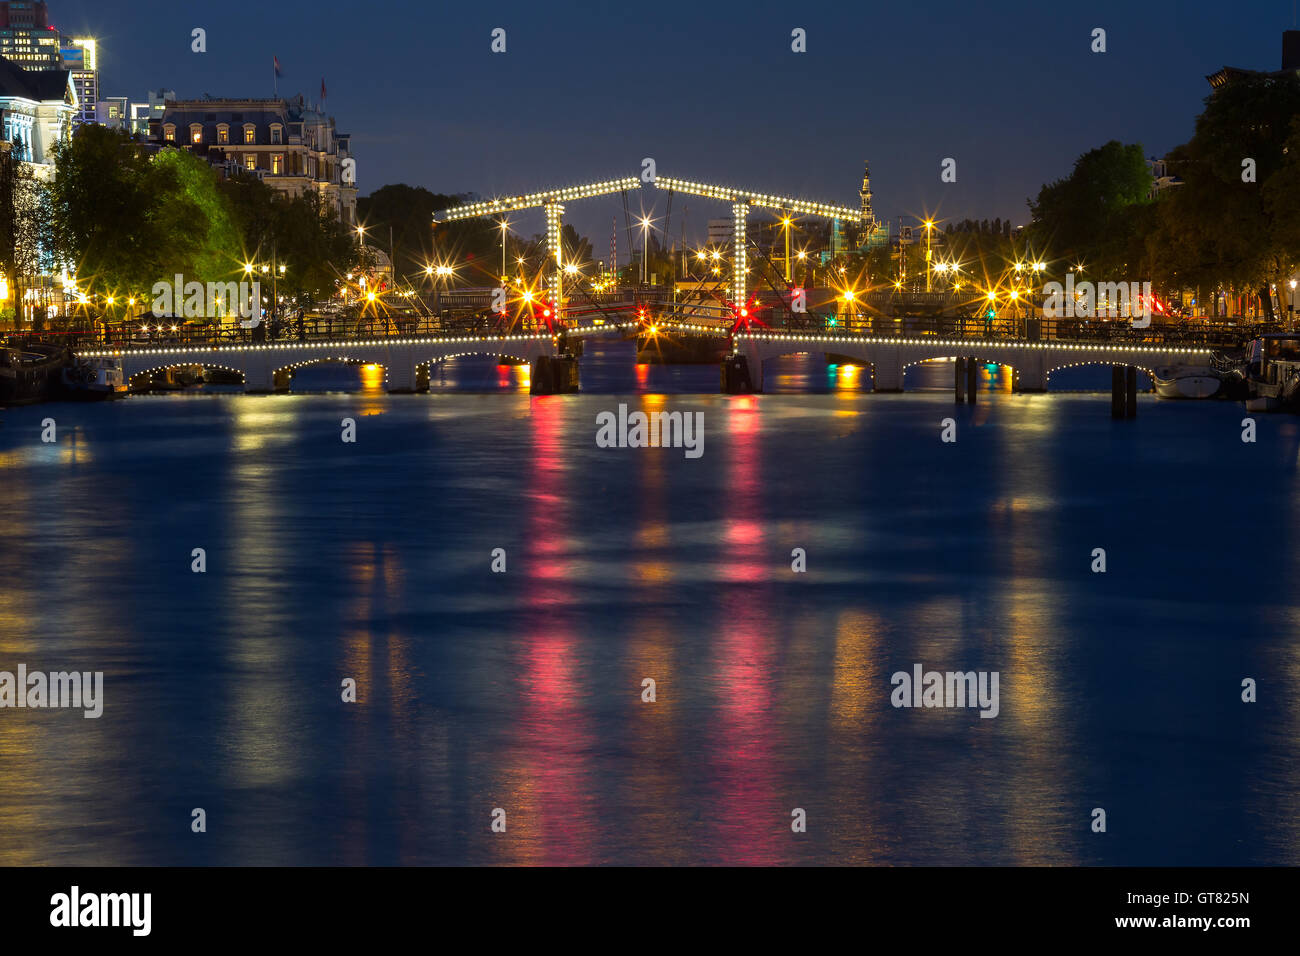 Pont Magere Brug, maigres, Amsterdam, Pays-Bas Banque D'Images